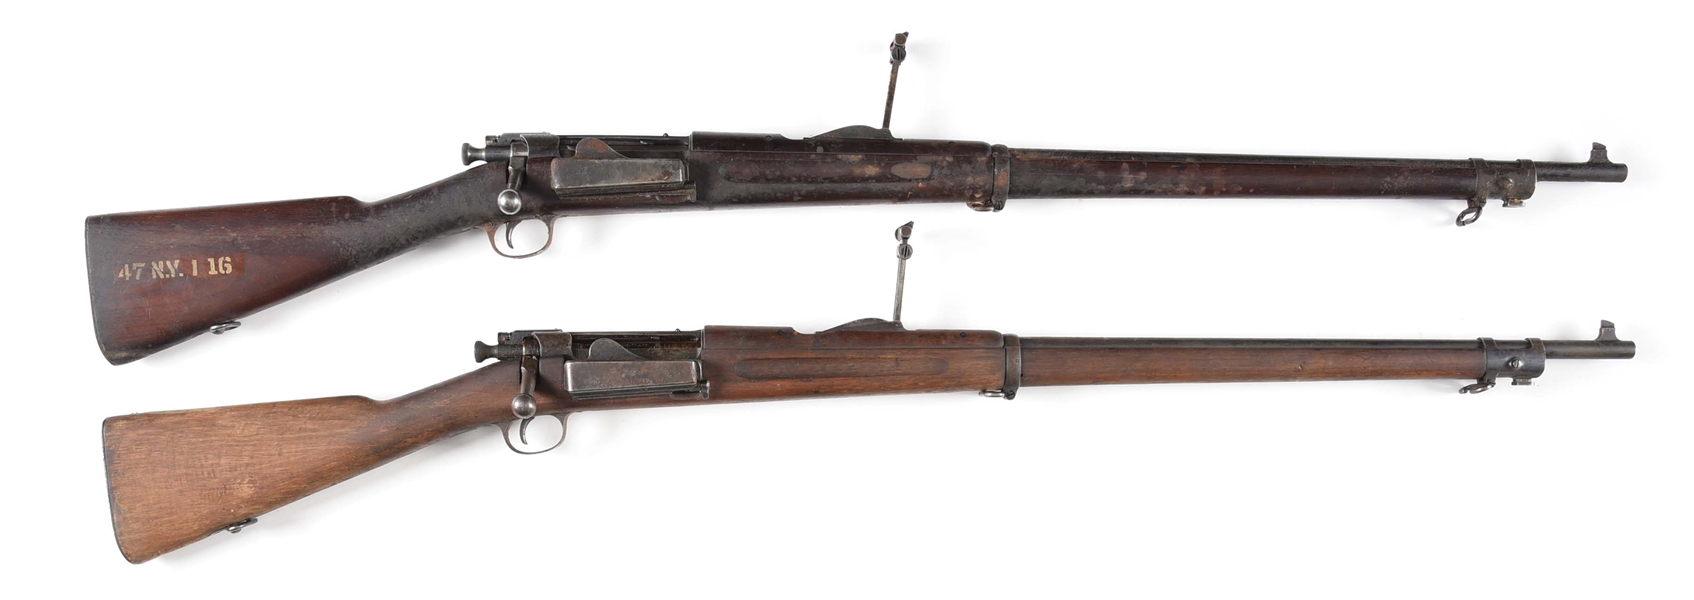 (C) LOT OF 2: SPRINGFIELD 1898 BOLT ACTION RIFLES.